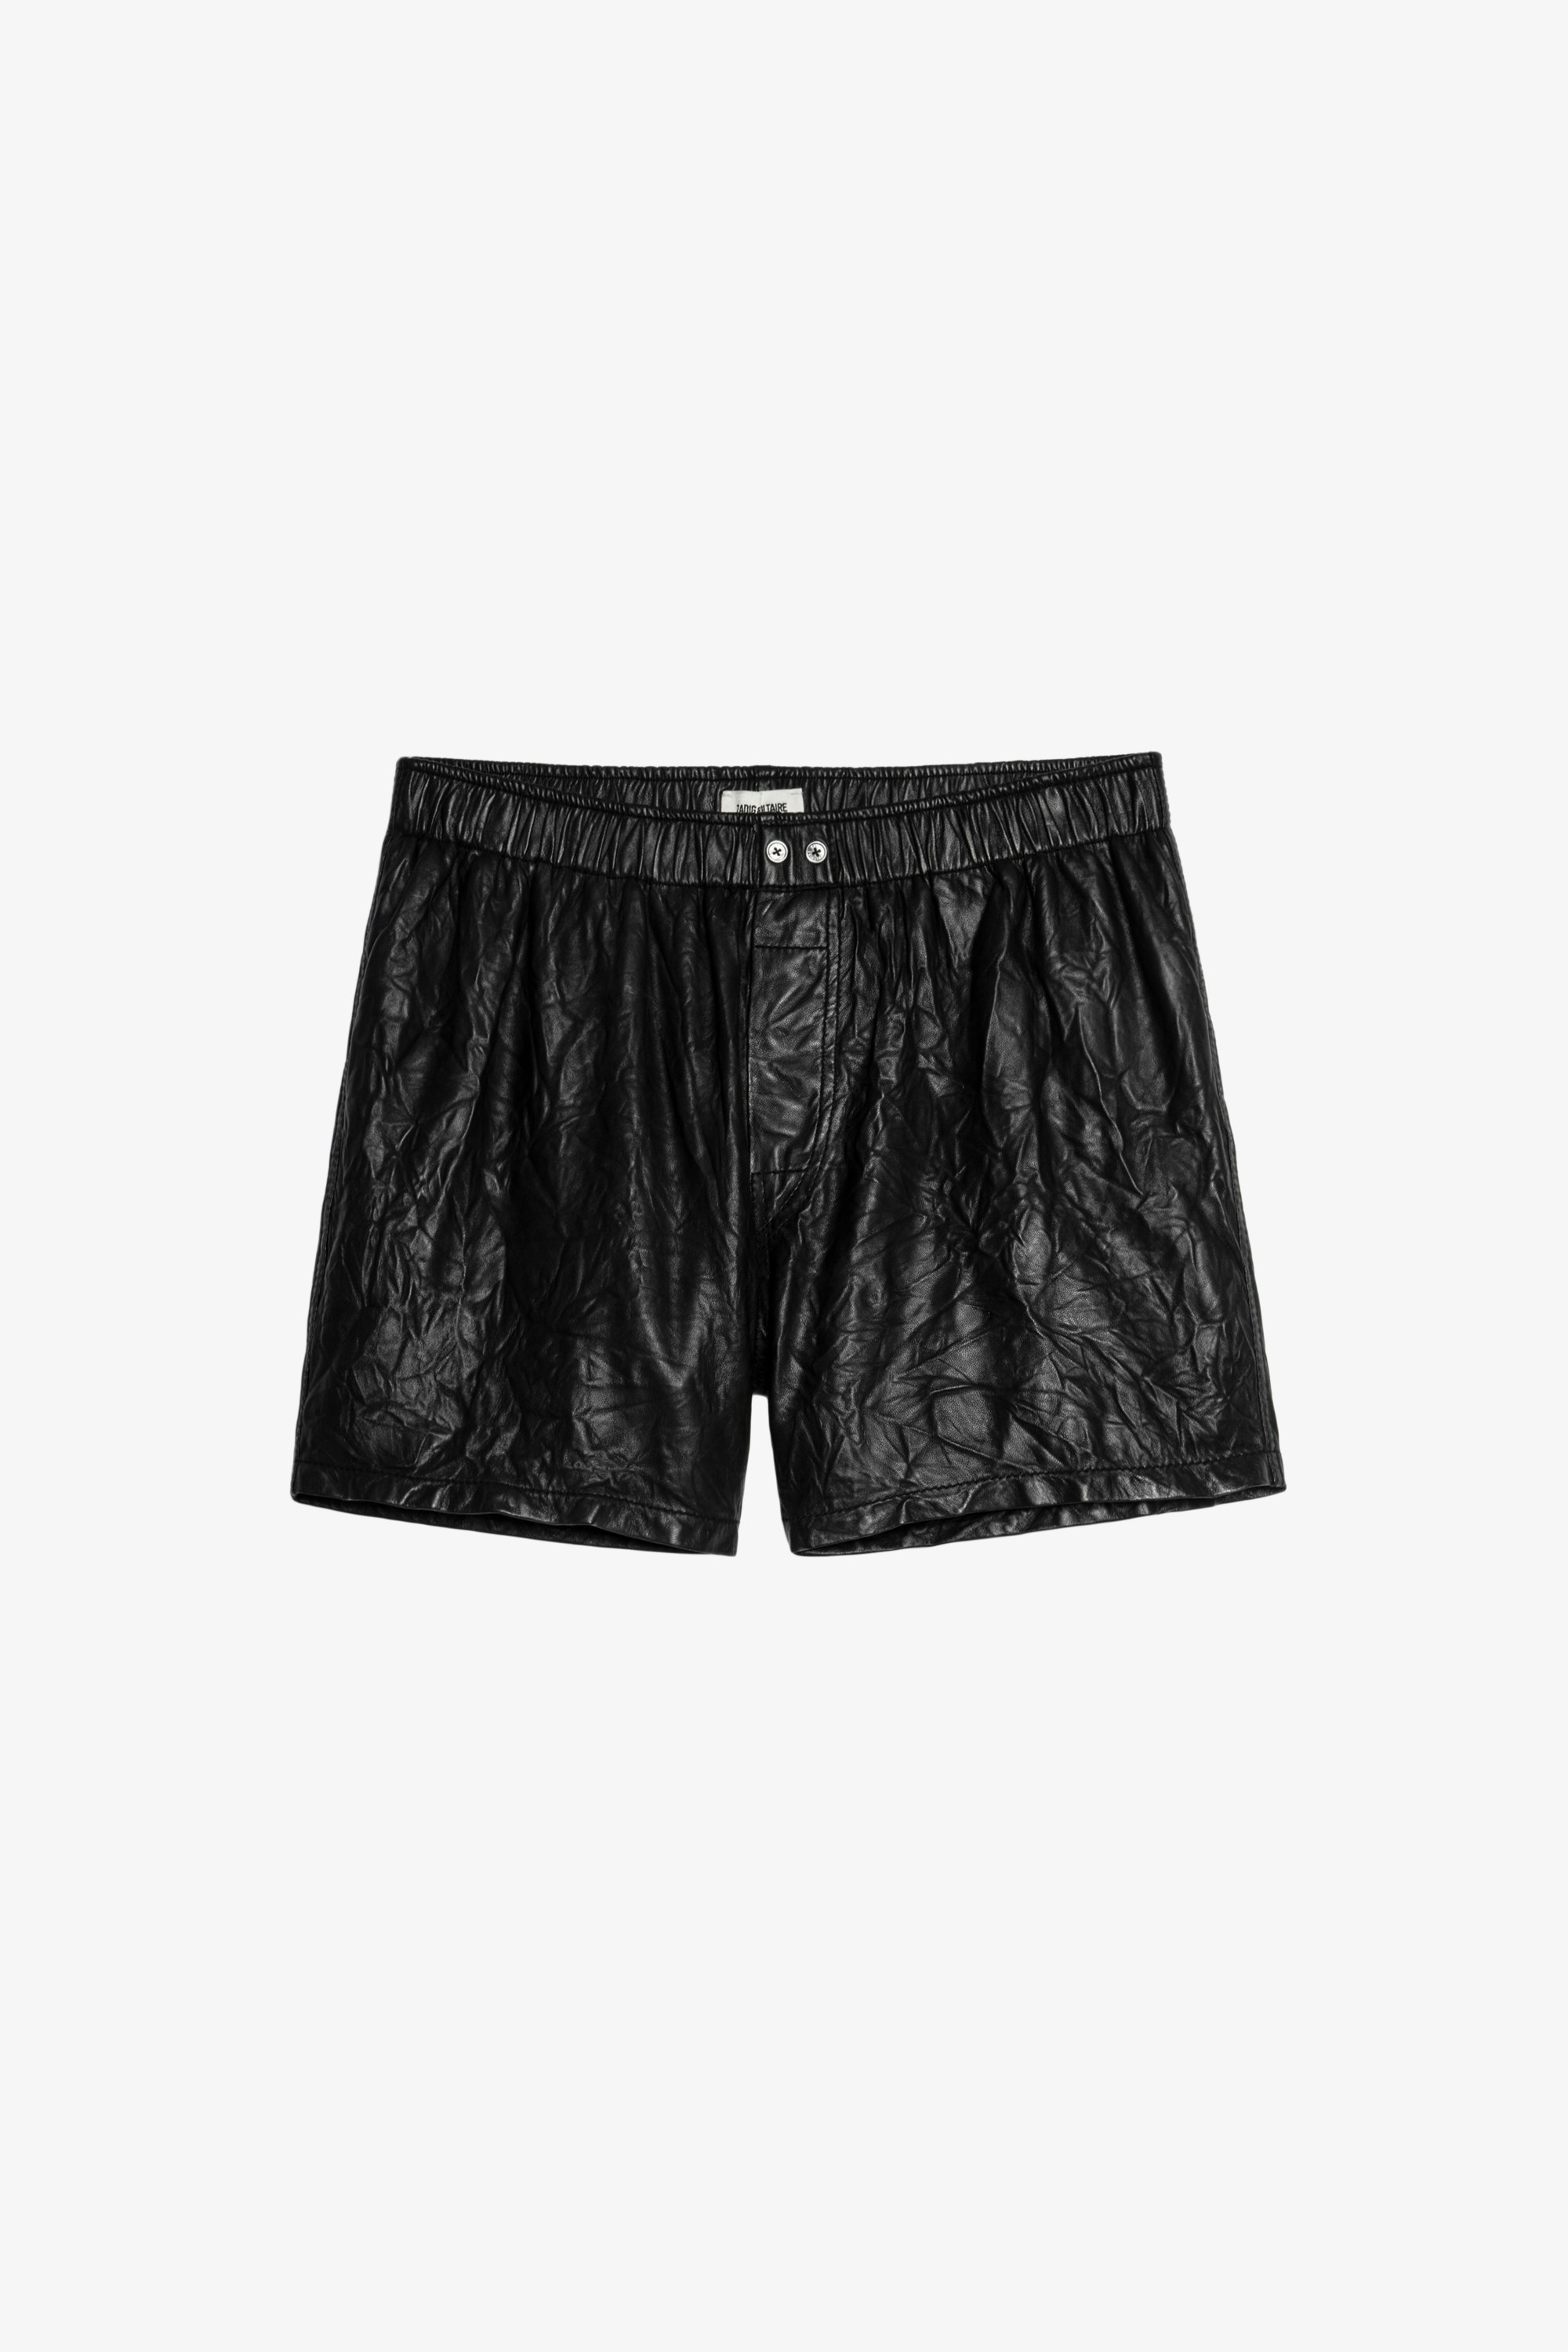 Pax Crinkled Leather Shorts - Women’s black leather shorts.